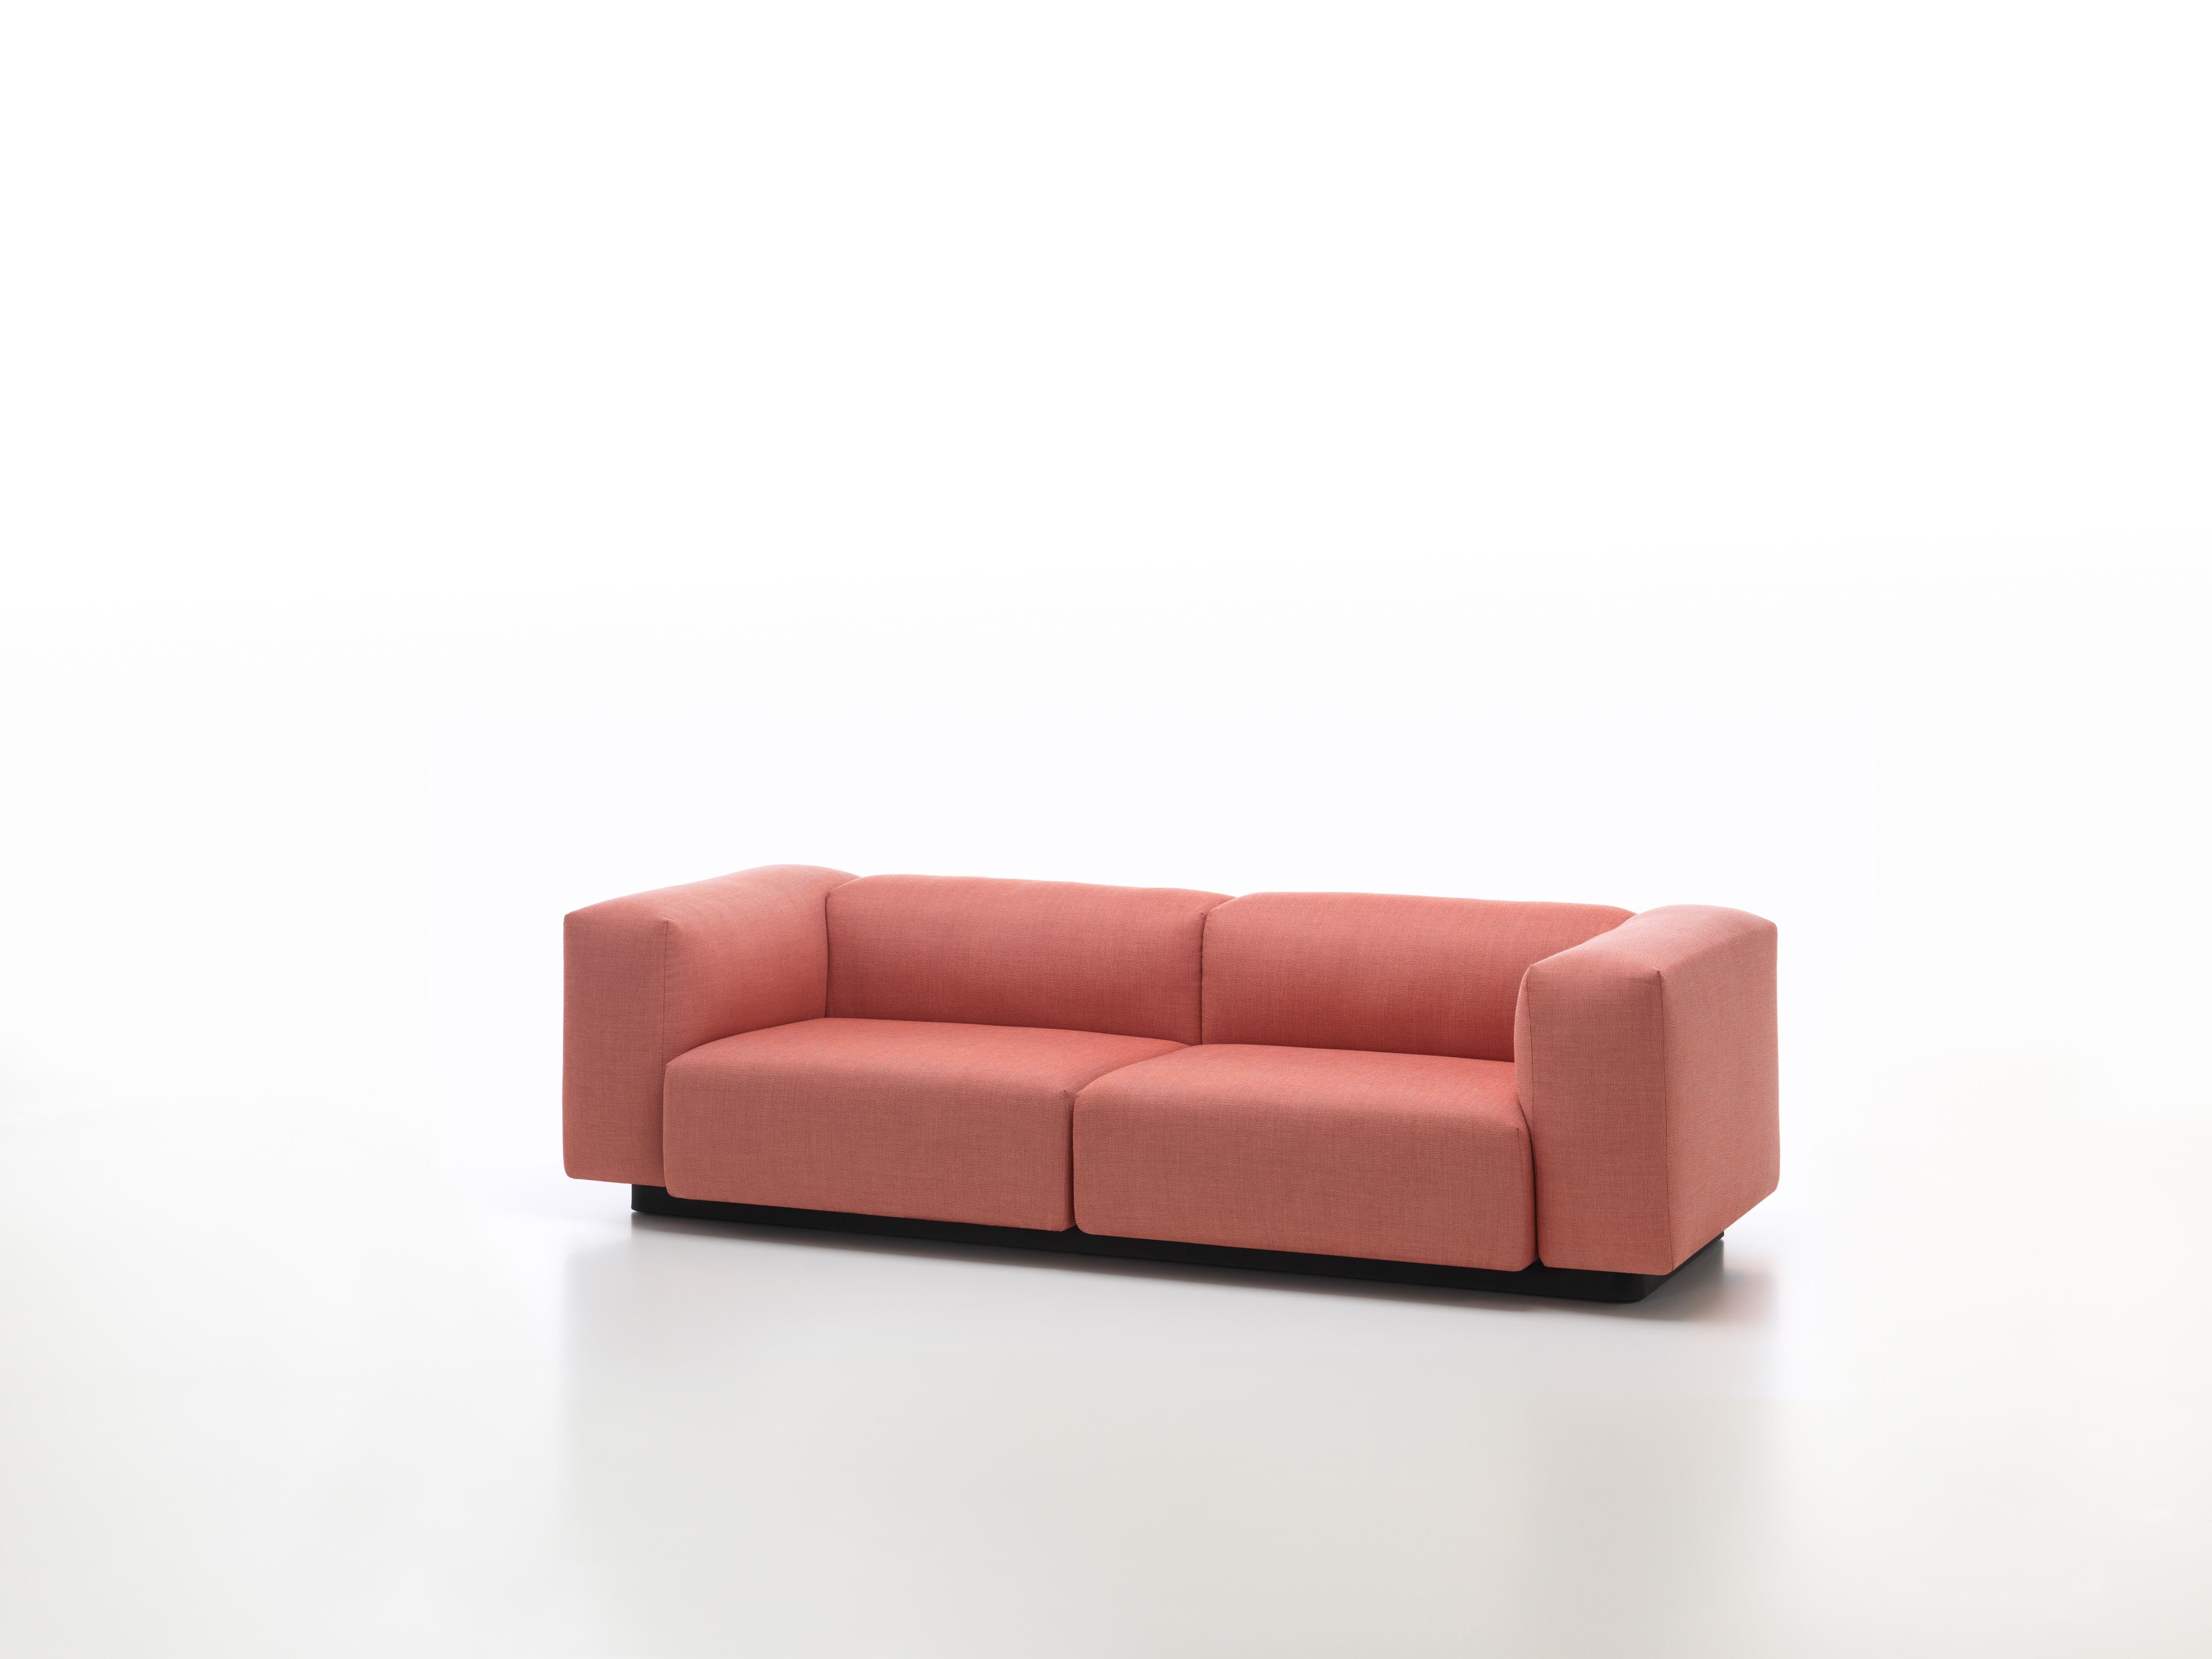 These items are only available in the United States.

The soft modular sofa is Jasper Morrison‘s updated interpretation of what has become a modern Classic: the low-slung modular sofa with a decidedly horizontal emphasis. Uniting carefully